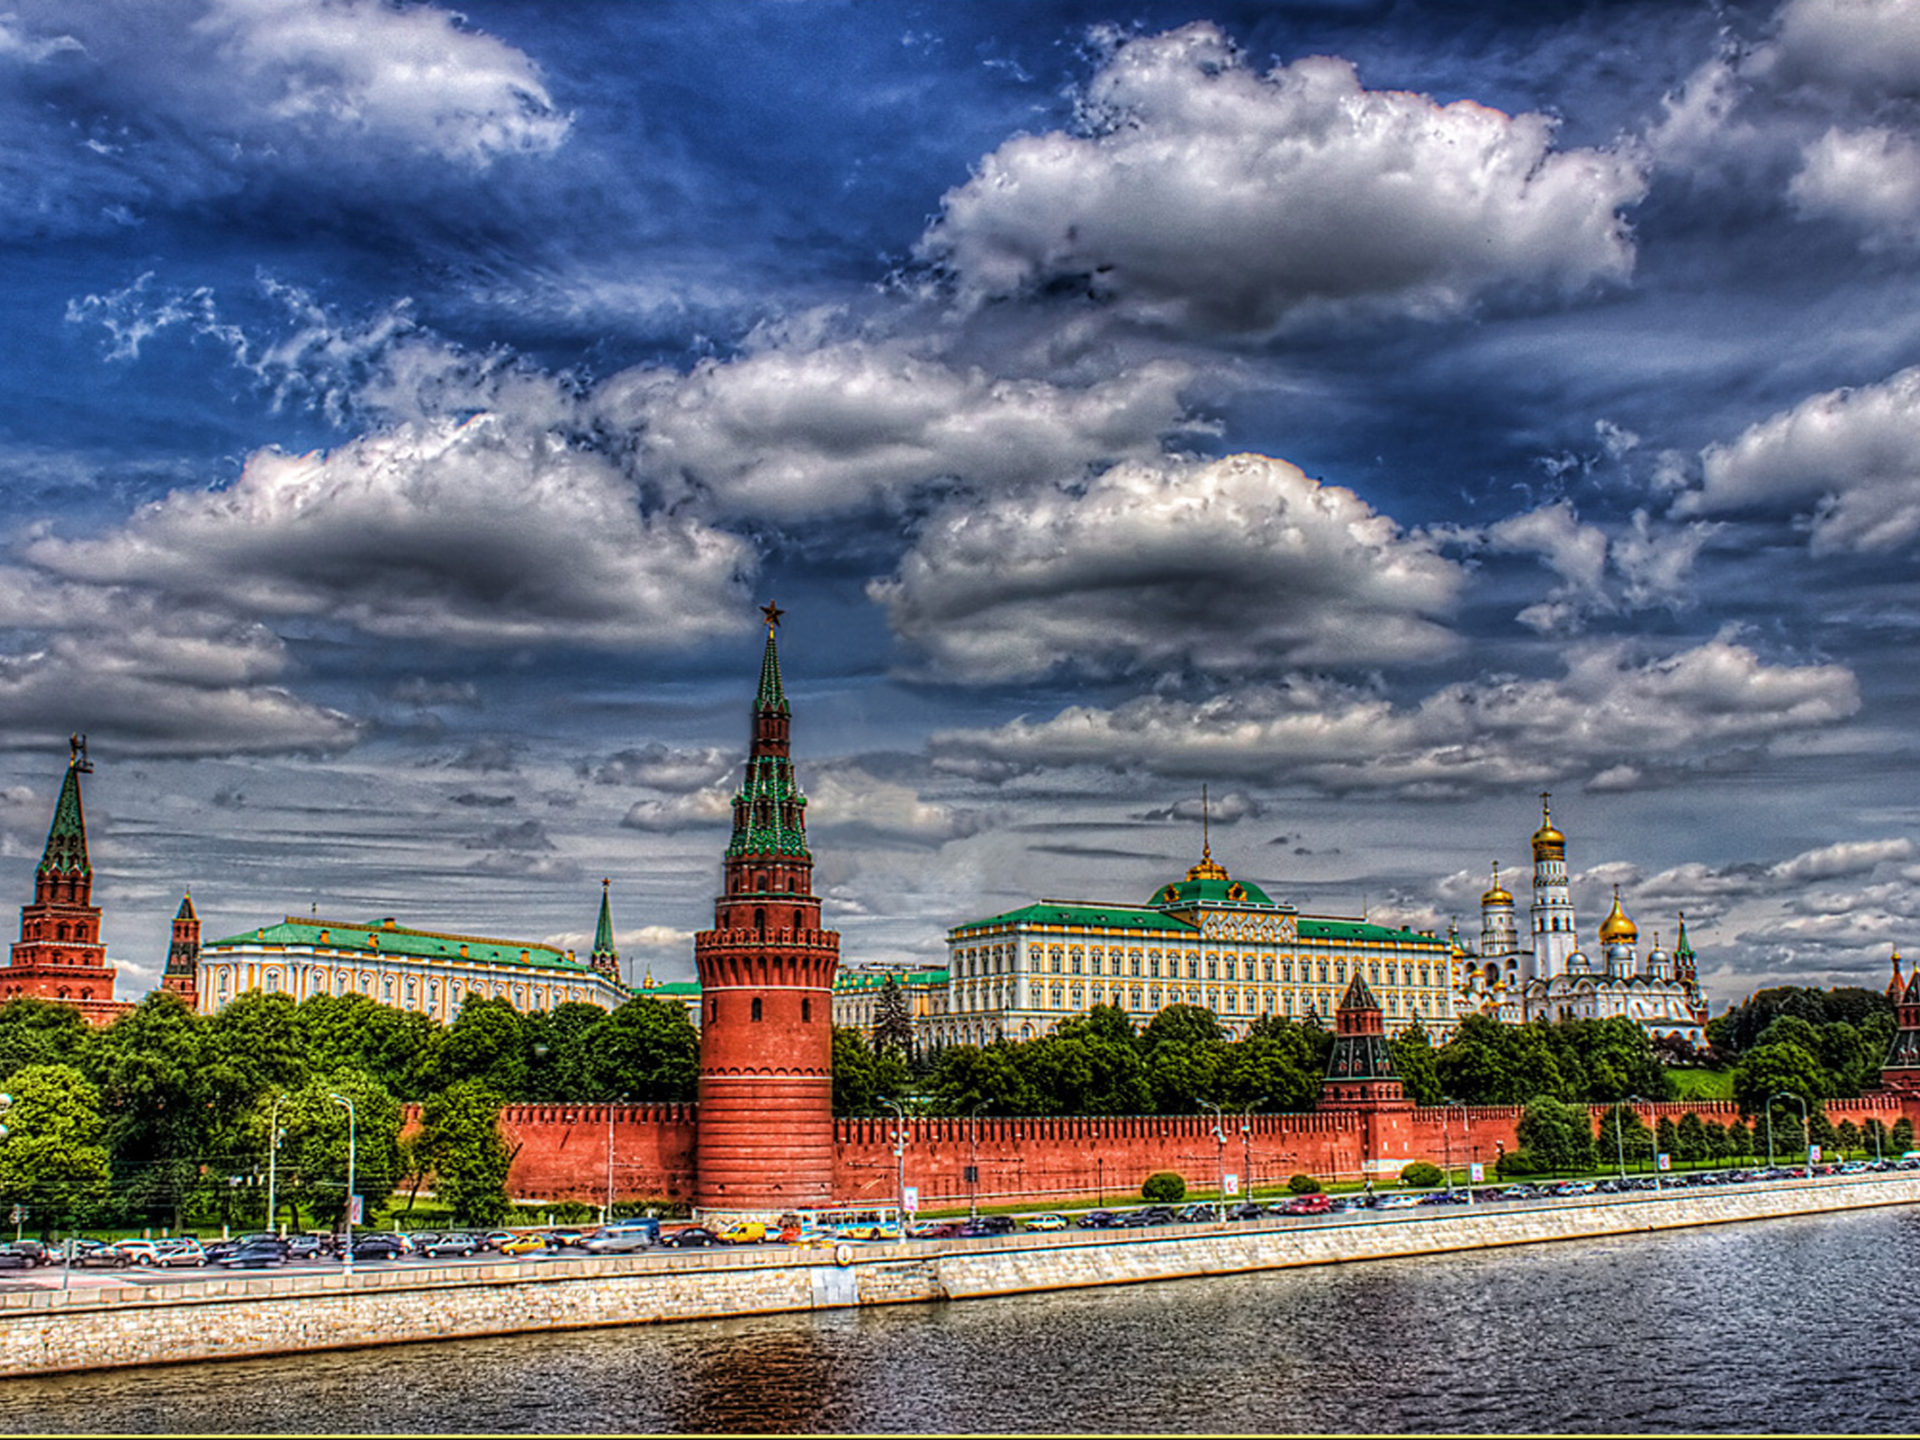 Moscow Kremlin Wallpapers